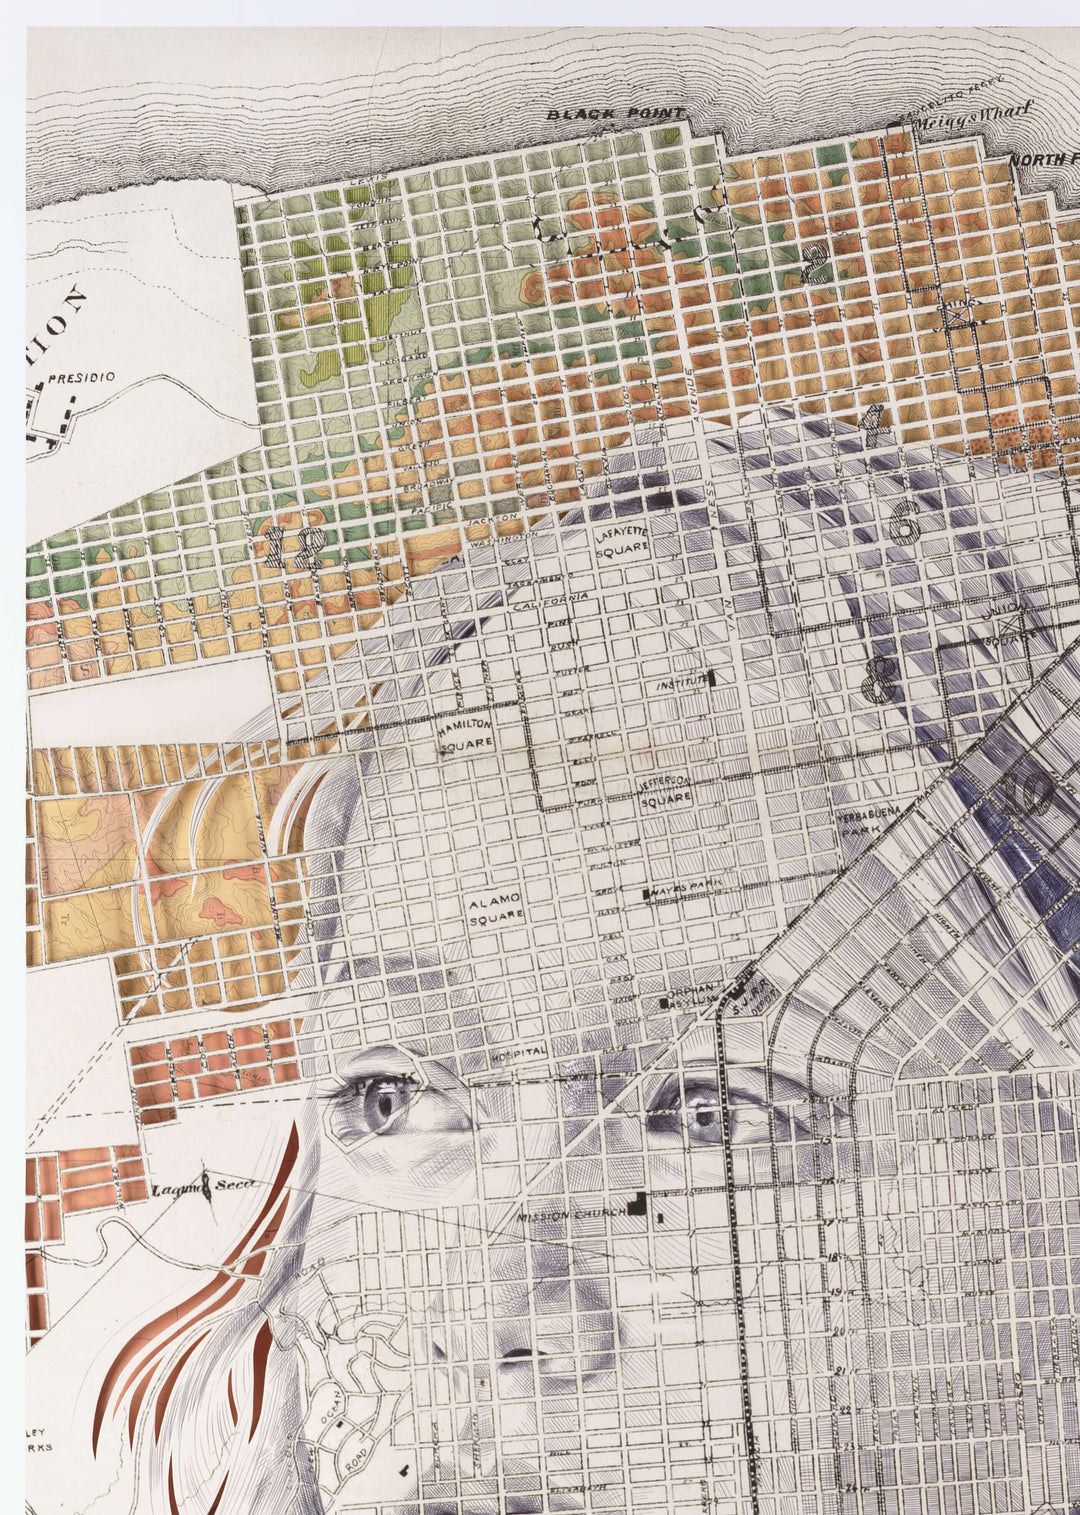 A drawing of a man's face on a map by Ed Fairburn's "San Francisco".